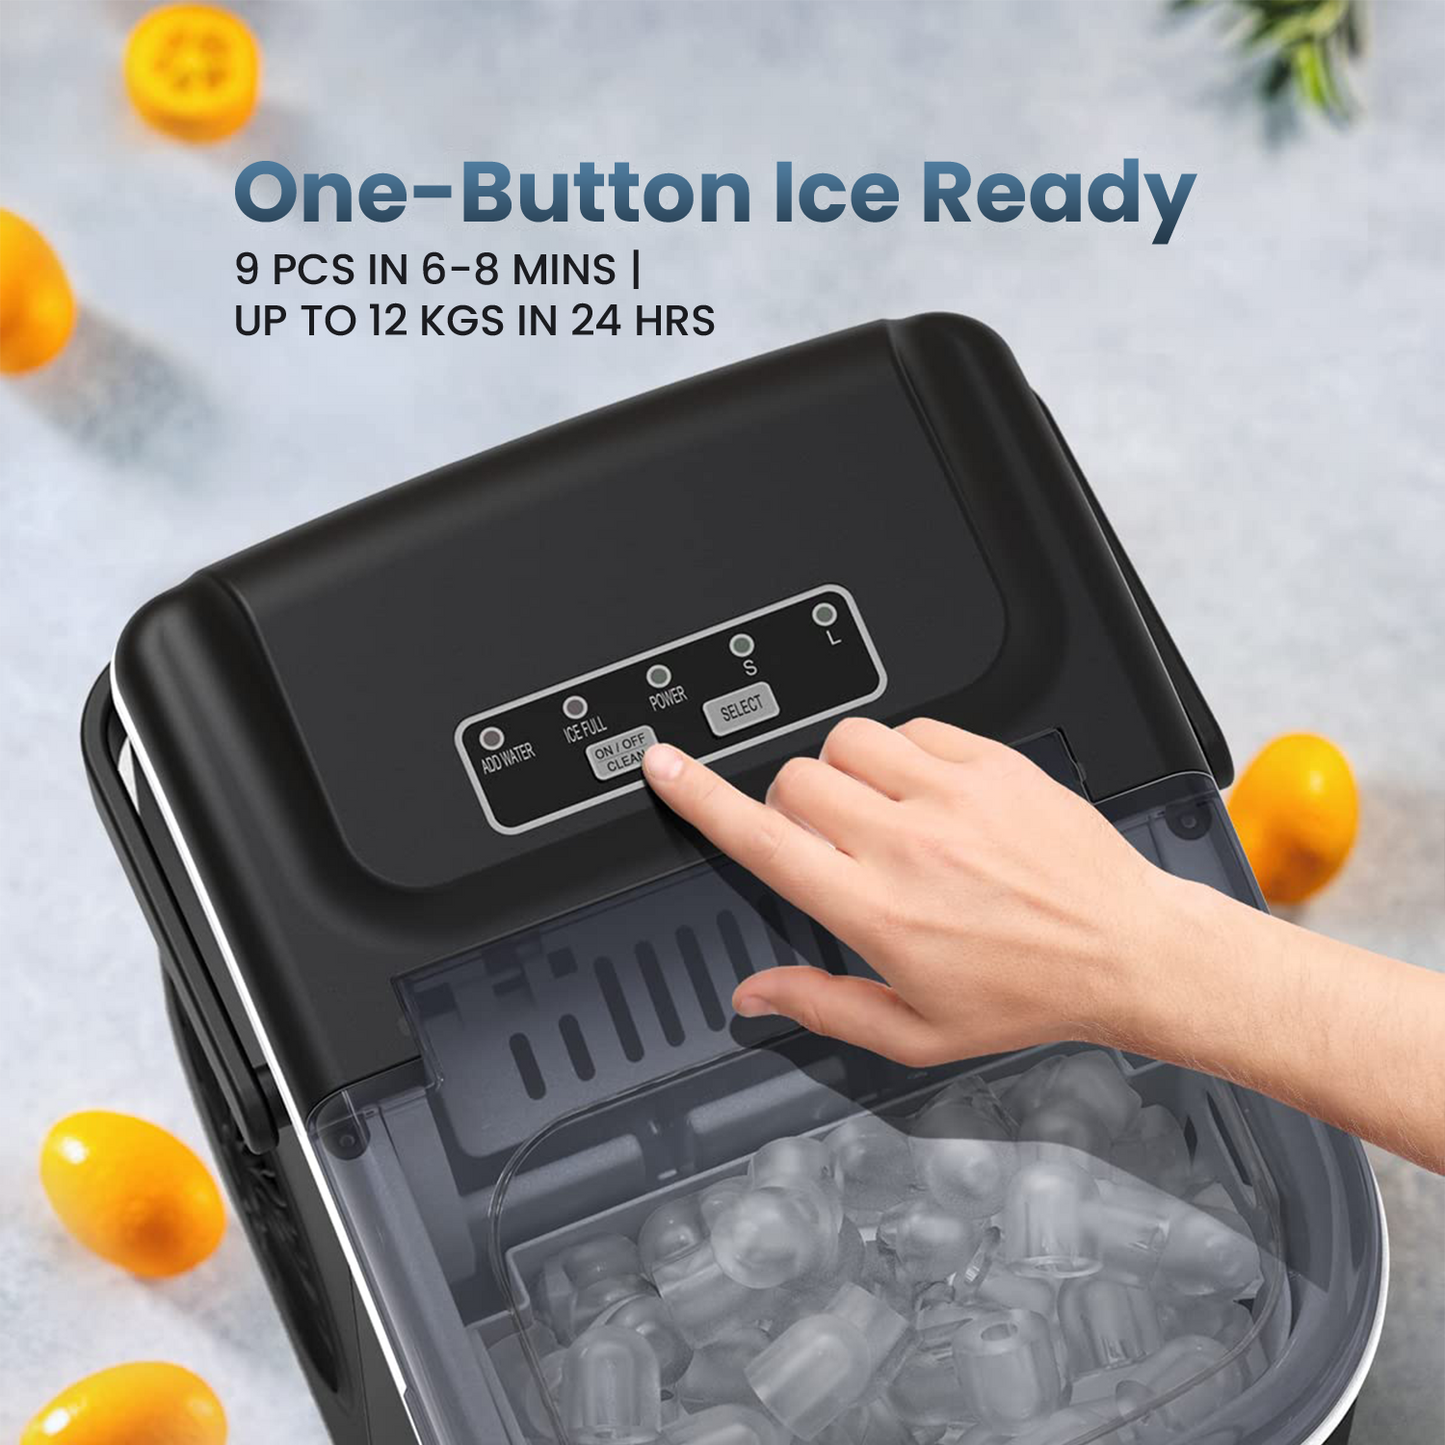 KiligH01 ice maker ice maker machine bullet ice nugget ice countertop icemaker